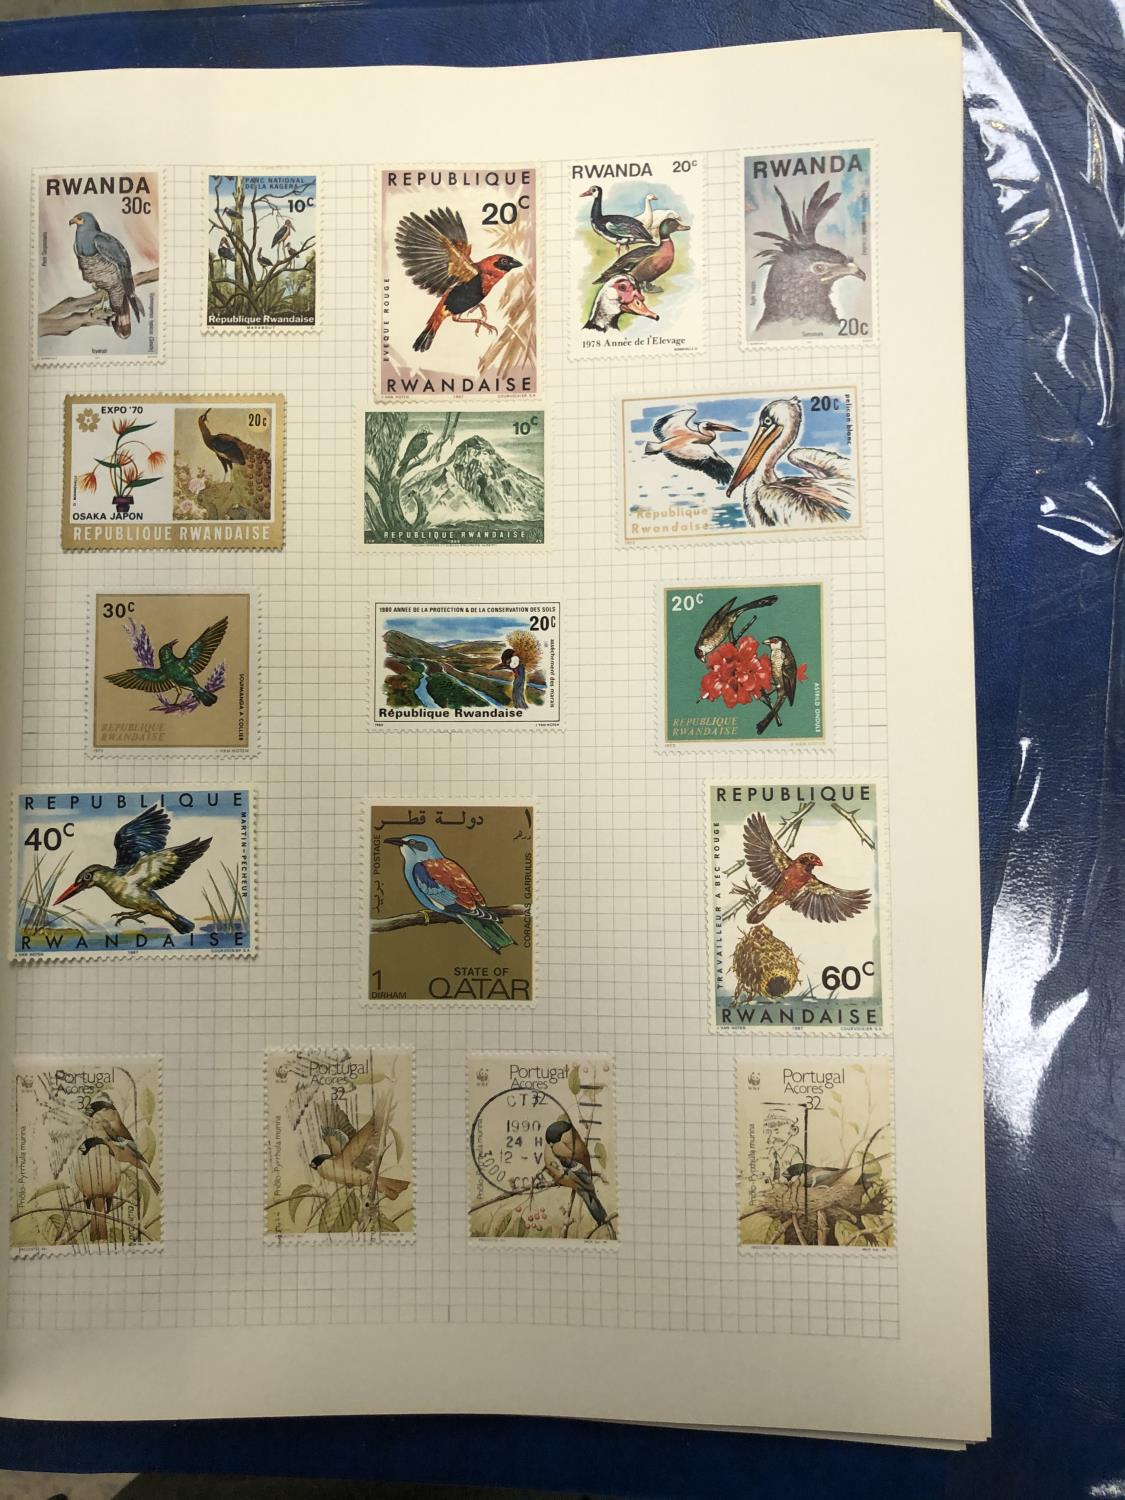 BIRDS . AN ALL WORLD THEMATIC COLLECTION OF BIRDS ON STAMPS . INCLUDED USA 2 X 25 SHEETS , PLUS - Image 7 of 9